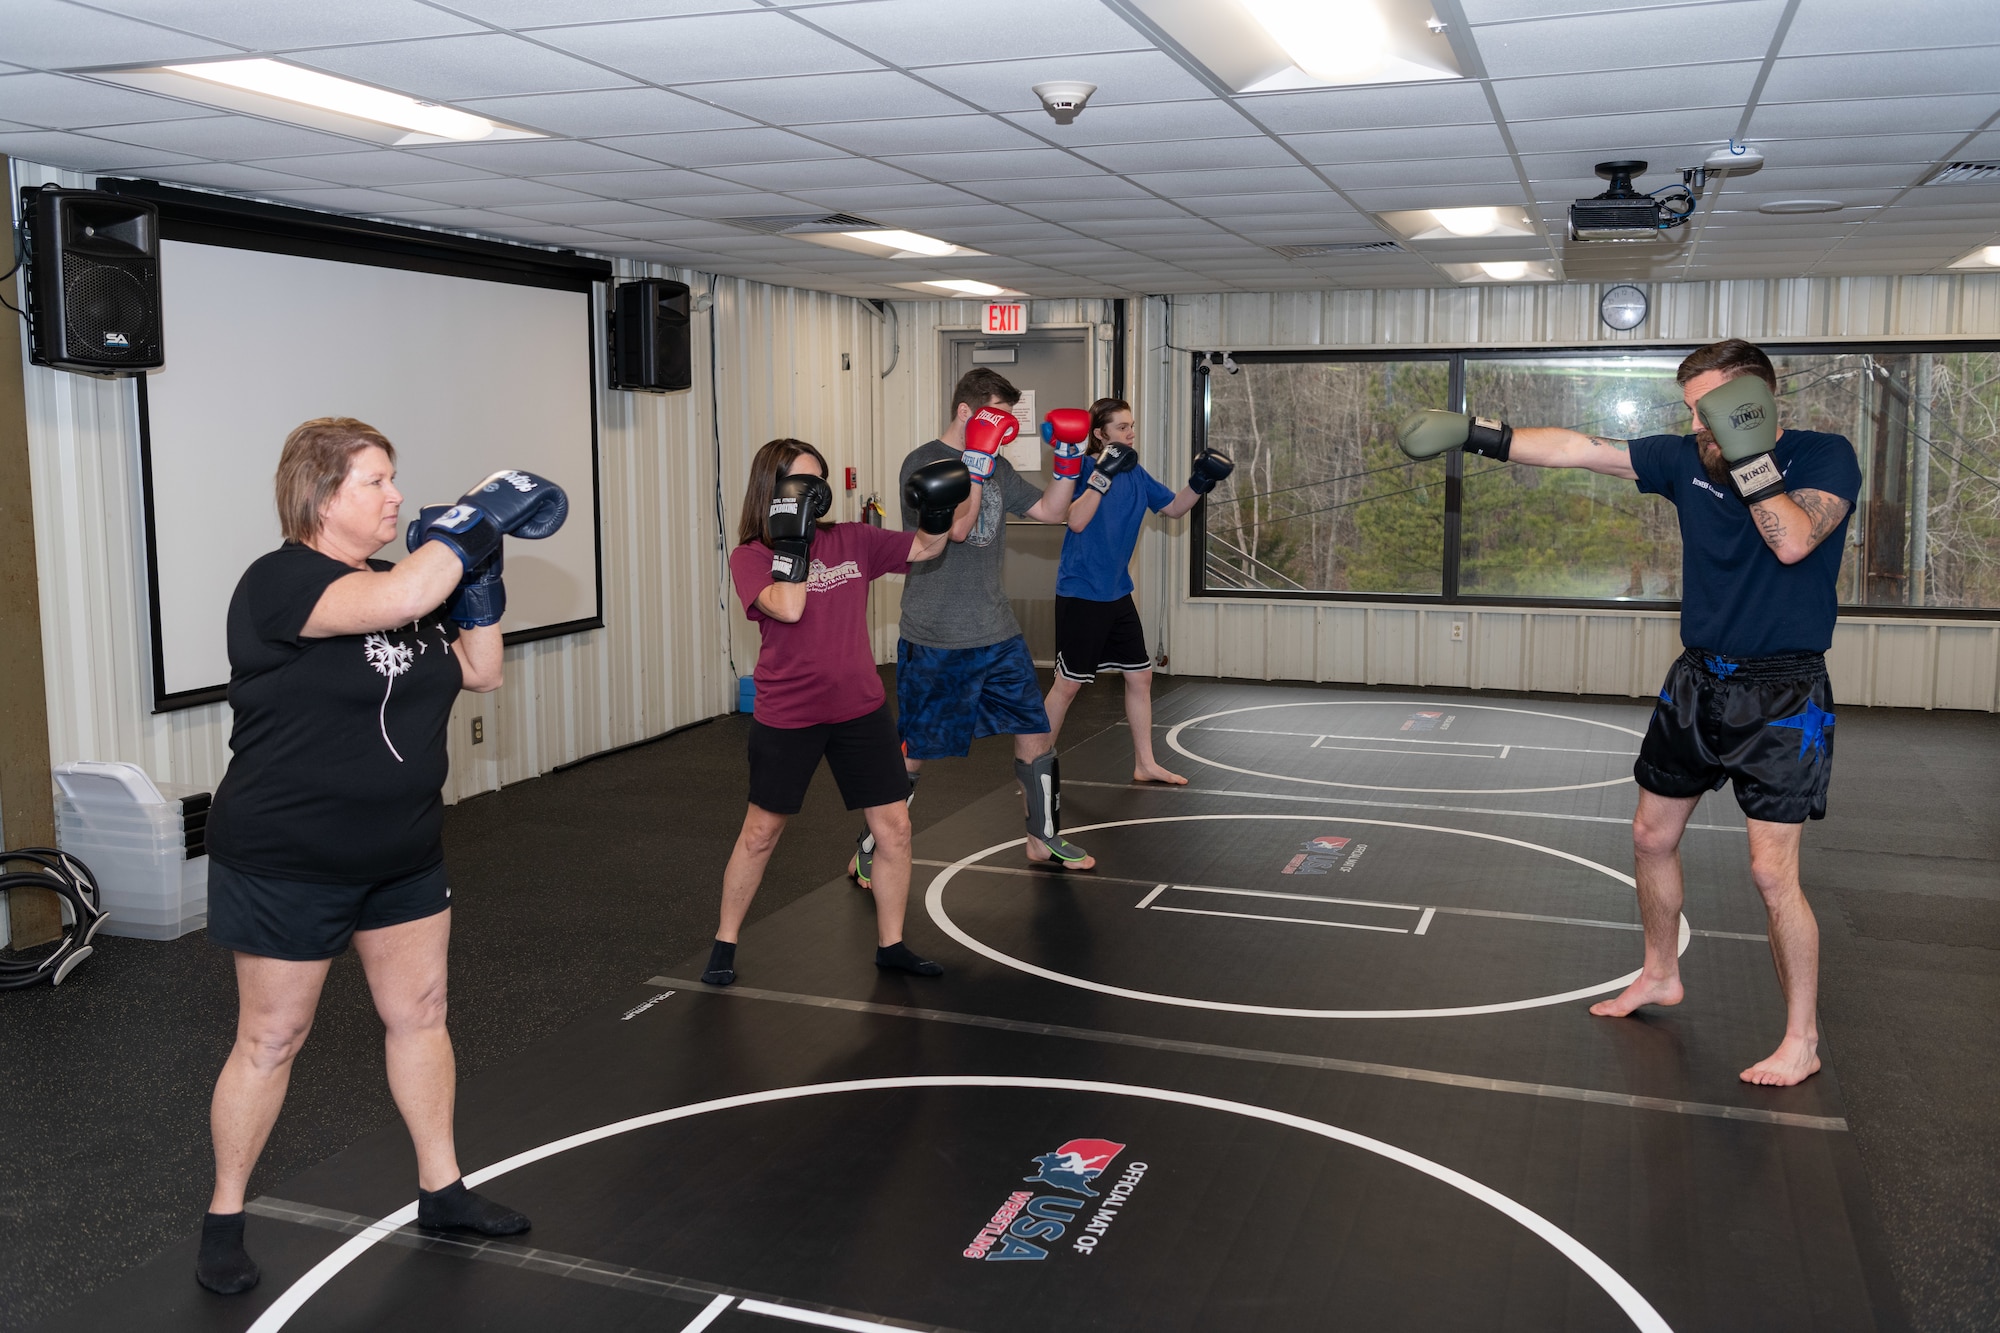 Kickboxing instructor, Ryan Clark, demonstrates movements to class participants at the Fitness Center, Arnold Air Force Base, Tenn., Feb. 8, 2024. The Arnold AFB Fitness Center offers kickboxing classes to its members each Tuesday and Thursday. The center recently celebrated a year of the class that continues to grow in interest with base personnel.